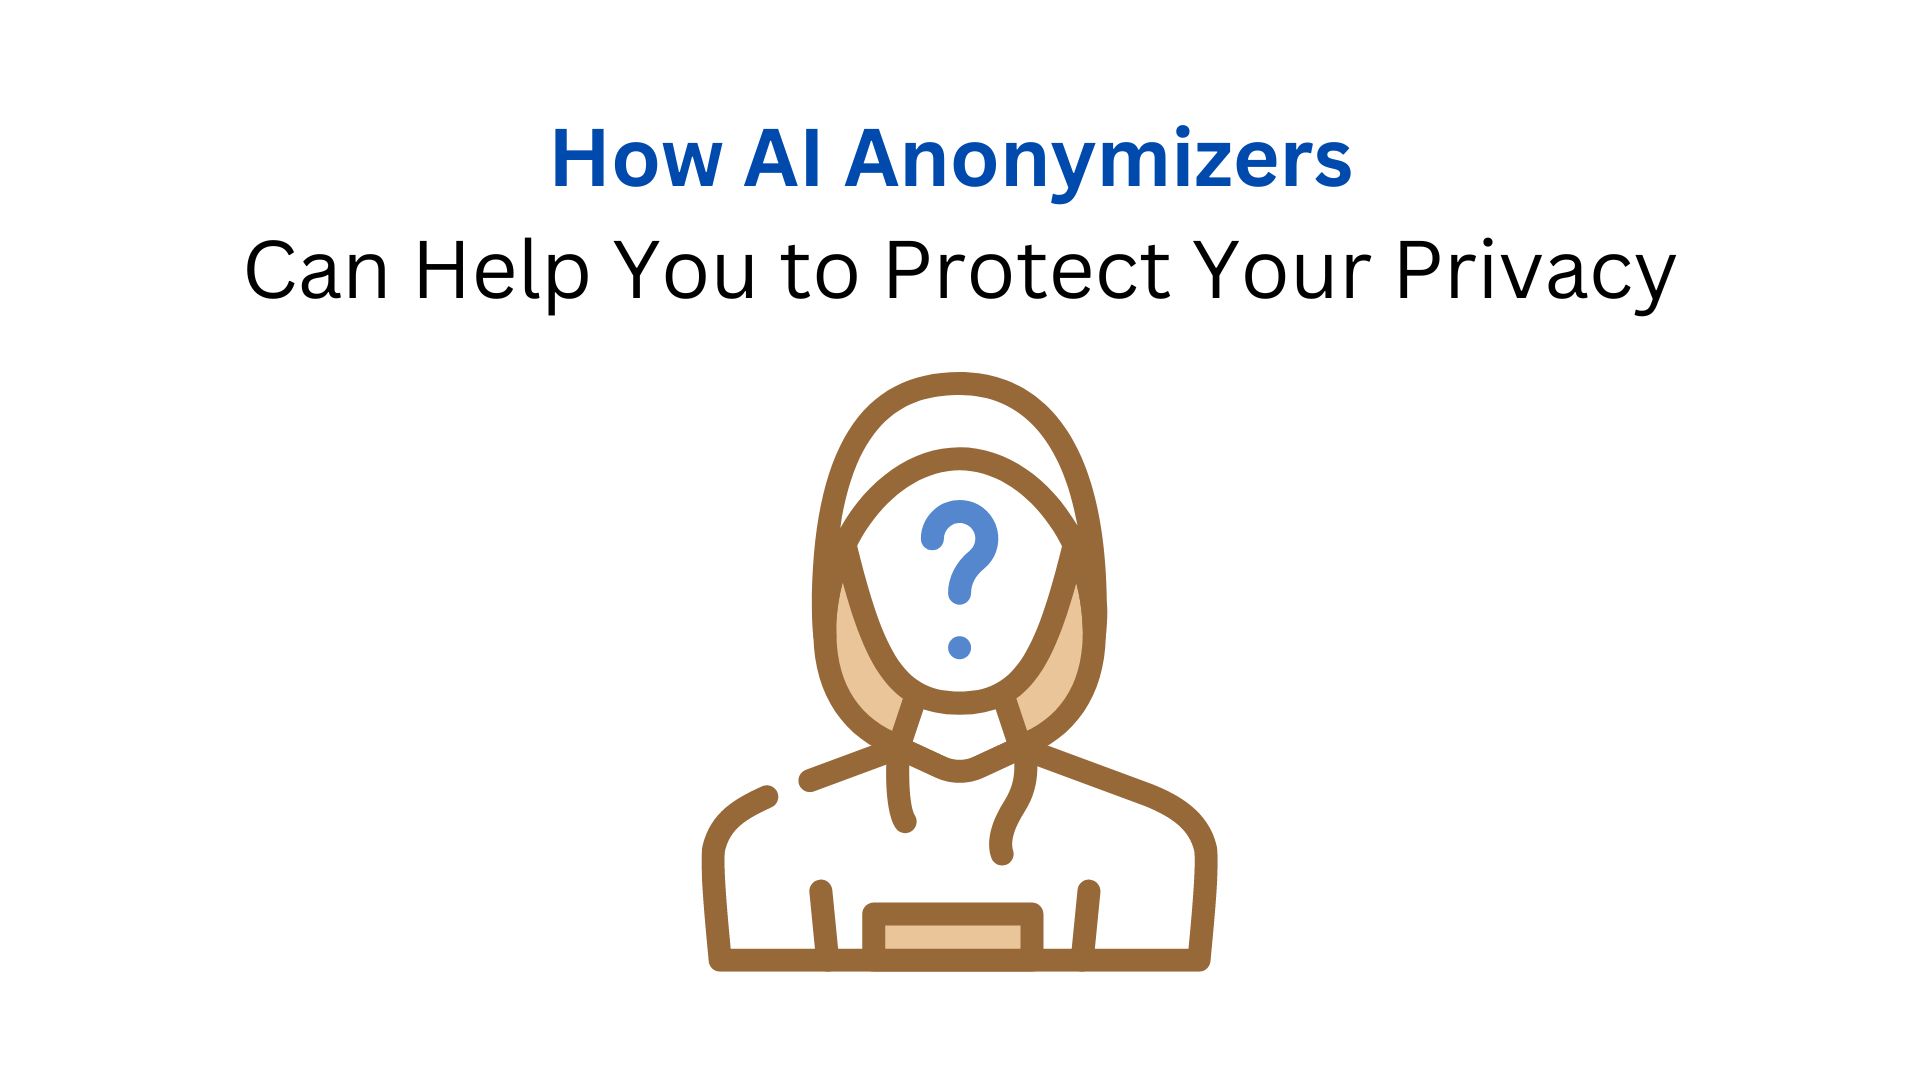 How AI Anonymizers Can Help You to Protect Your Privacy